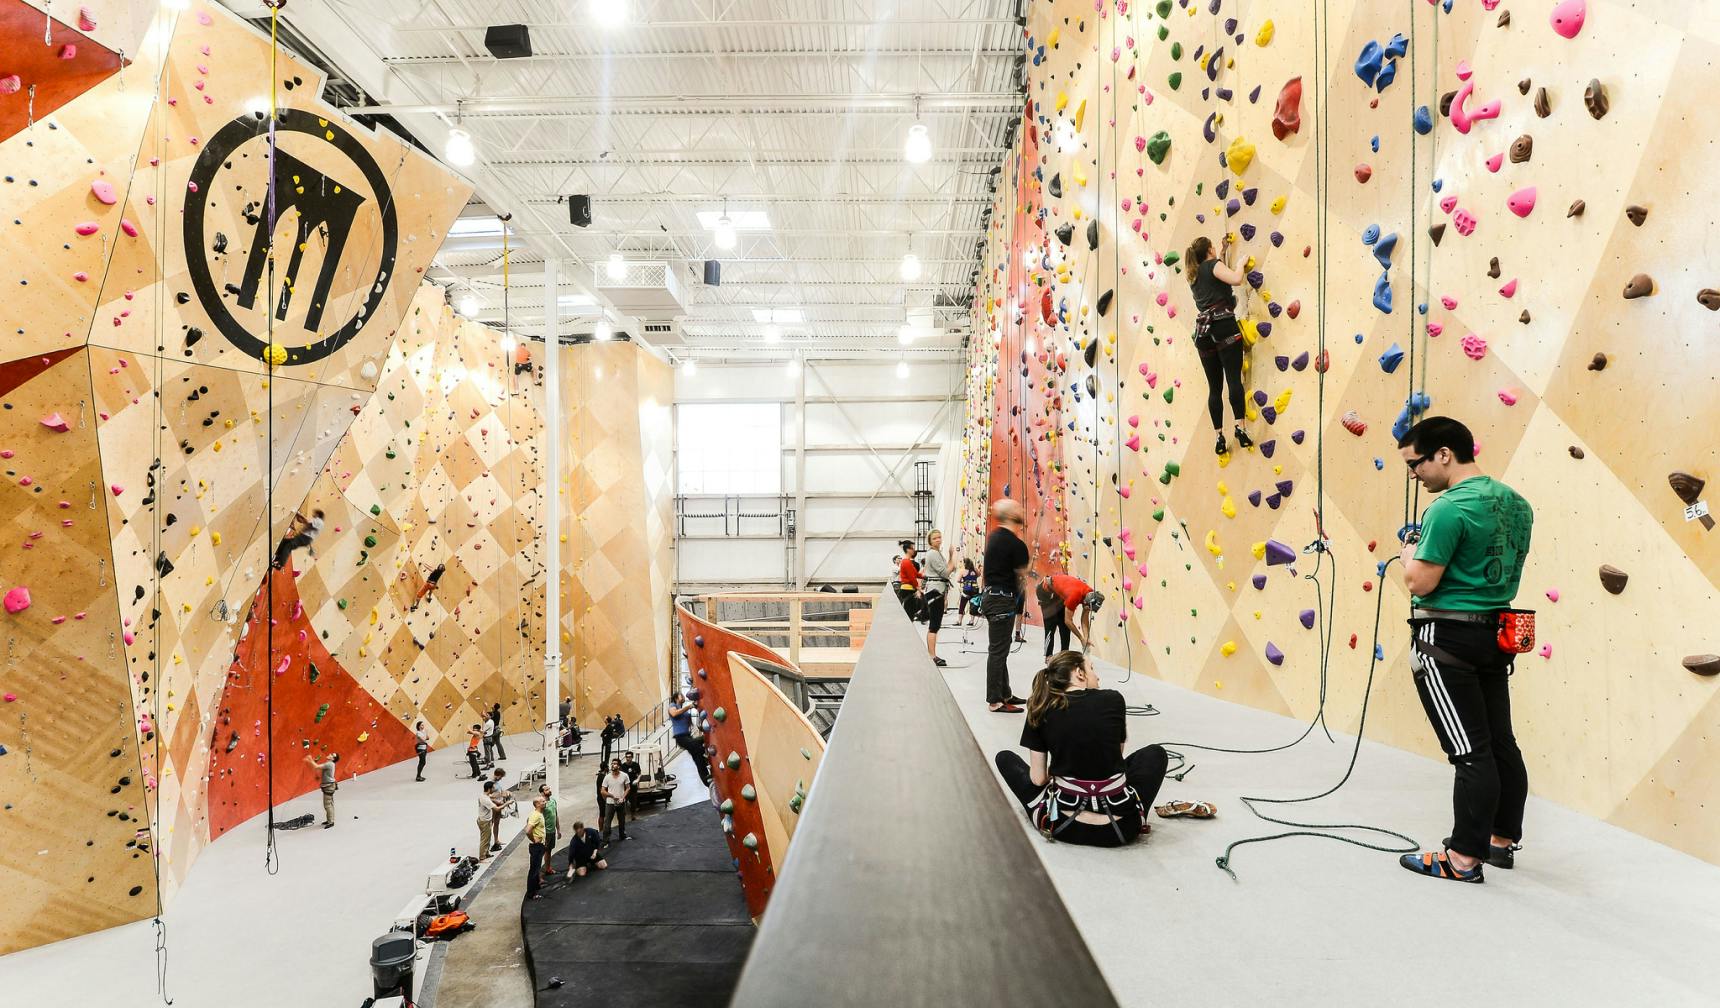 Two-story indoor climbing gym full of people